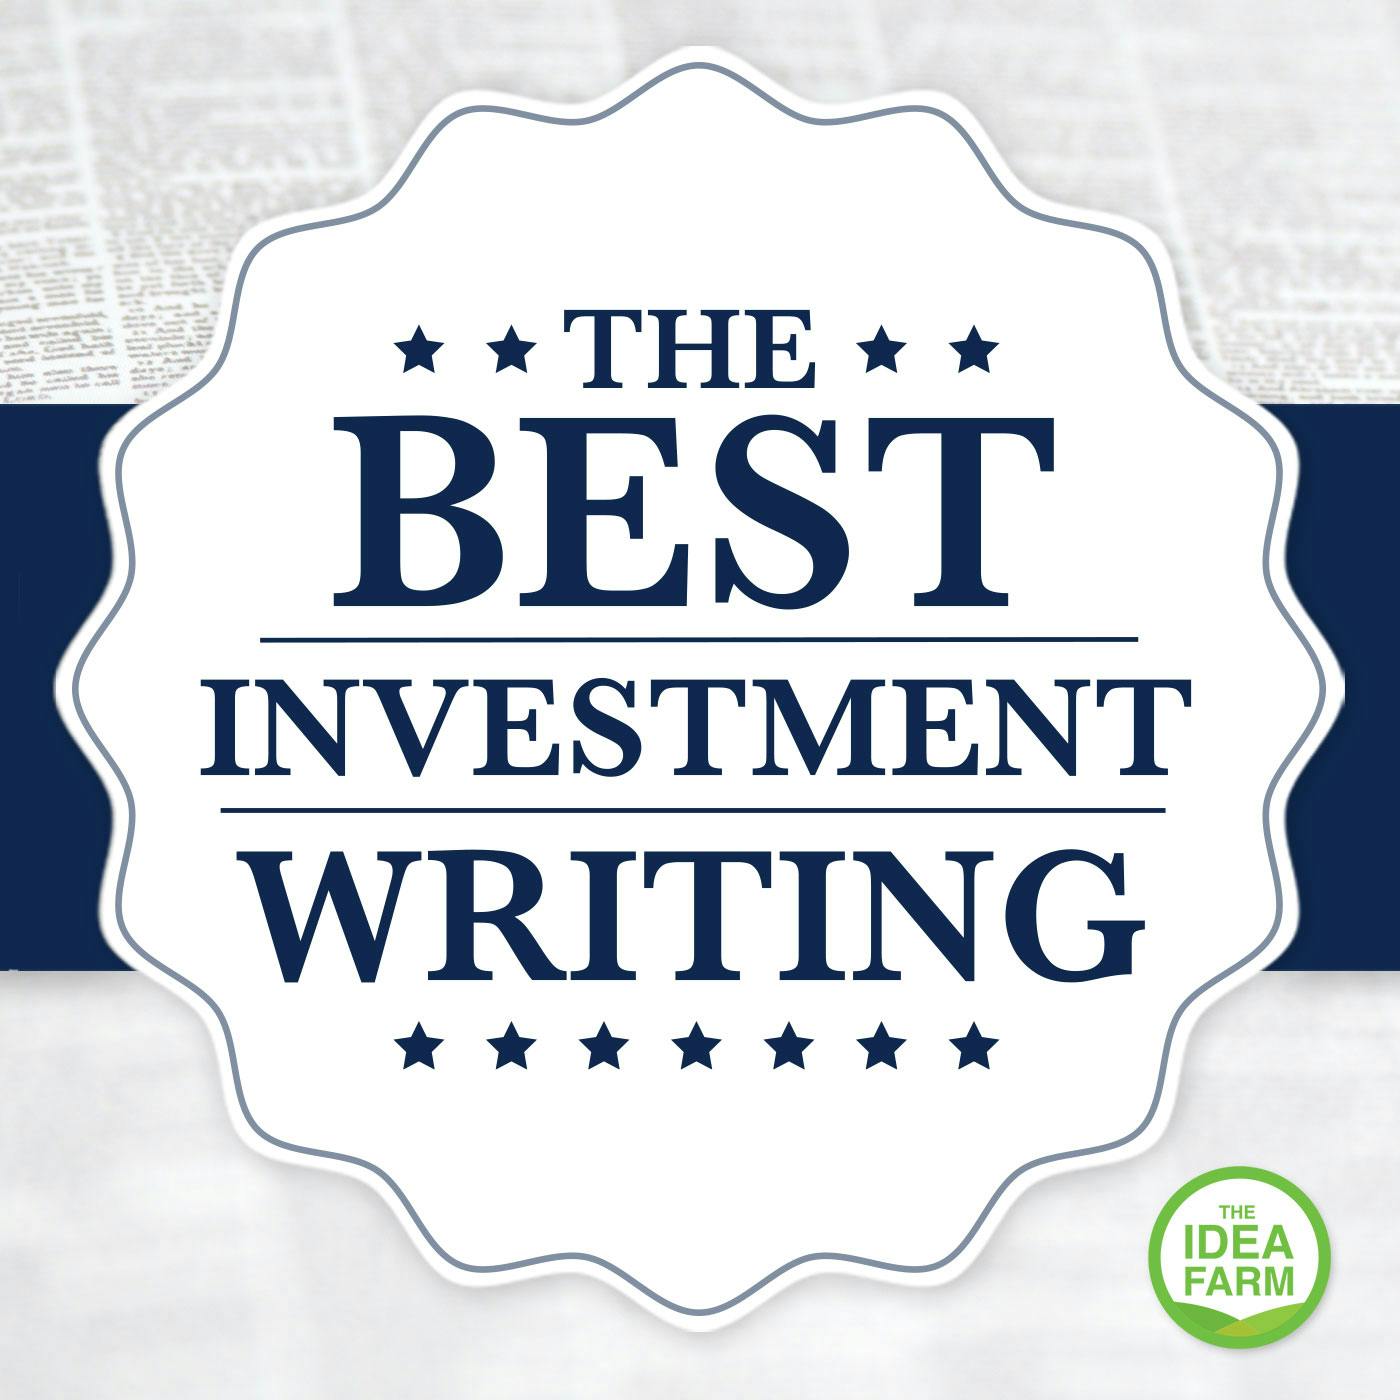 The Best Investment Writing Volume 5: Selected Writing from Prominent Investors and Authors